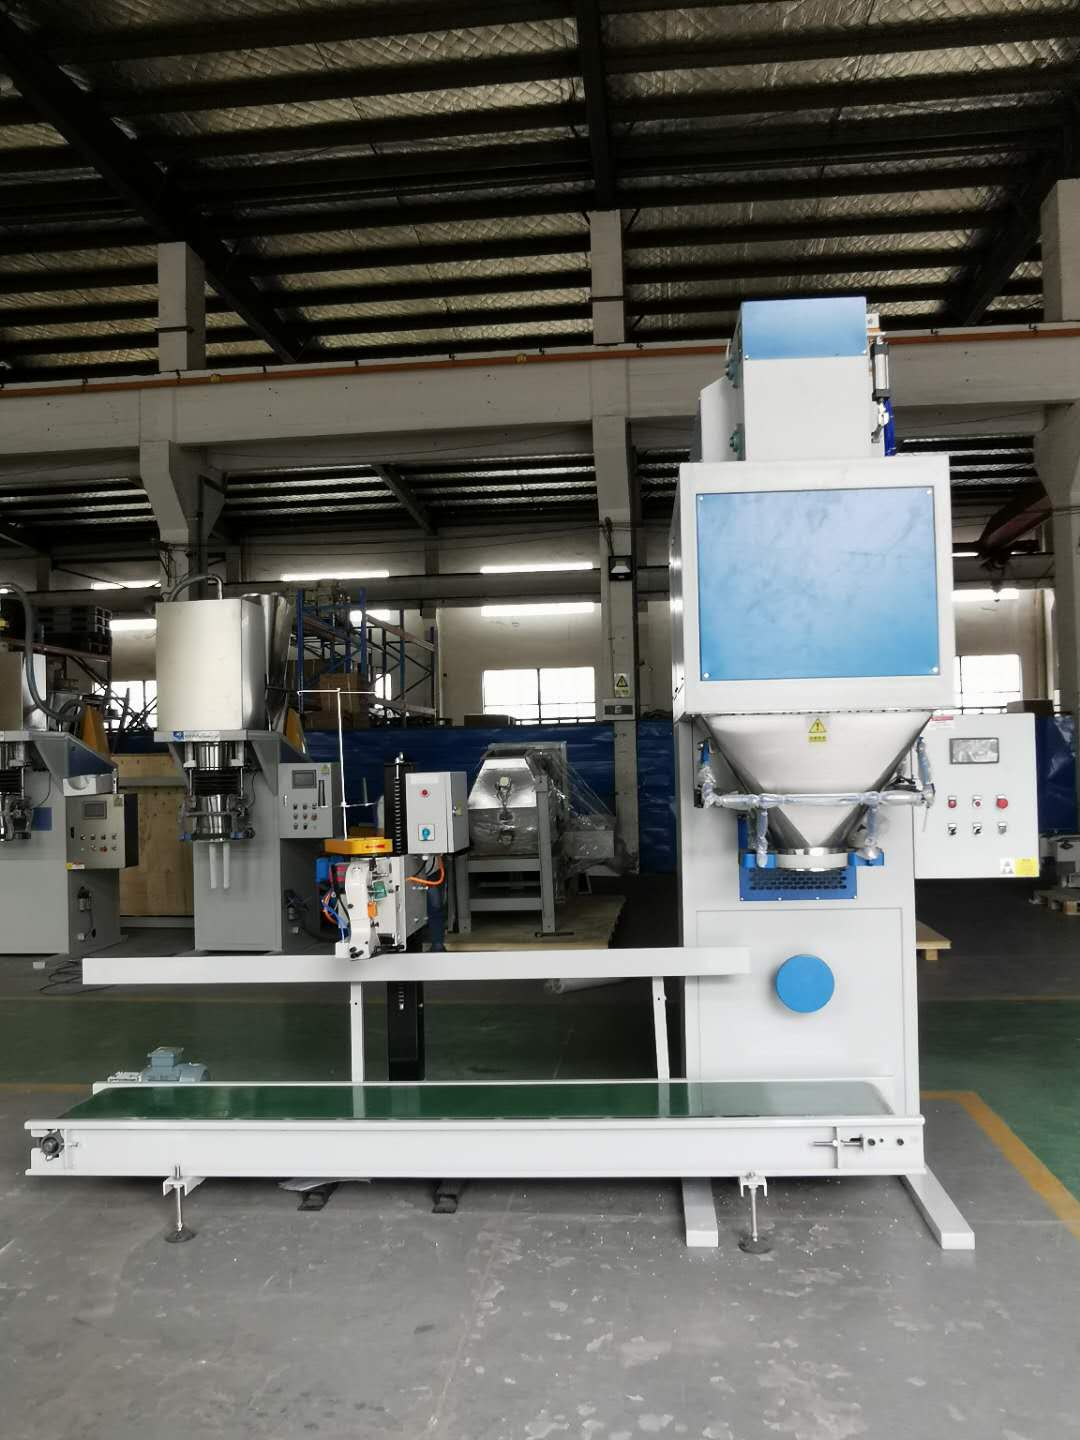 full automatic Barley packaging machine 无锡航一机械有限公司WUXI HY MACHINERY CO., LTD full automatic bagging palletizing and wrapping system Fully Automatic Packing System Palletizing Line